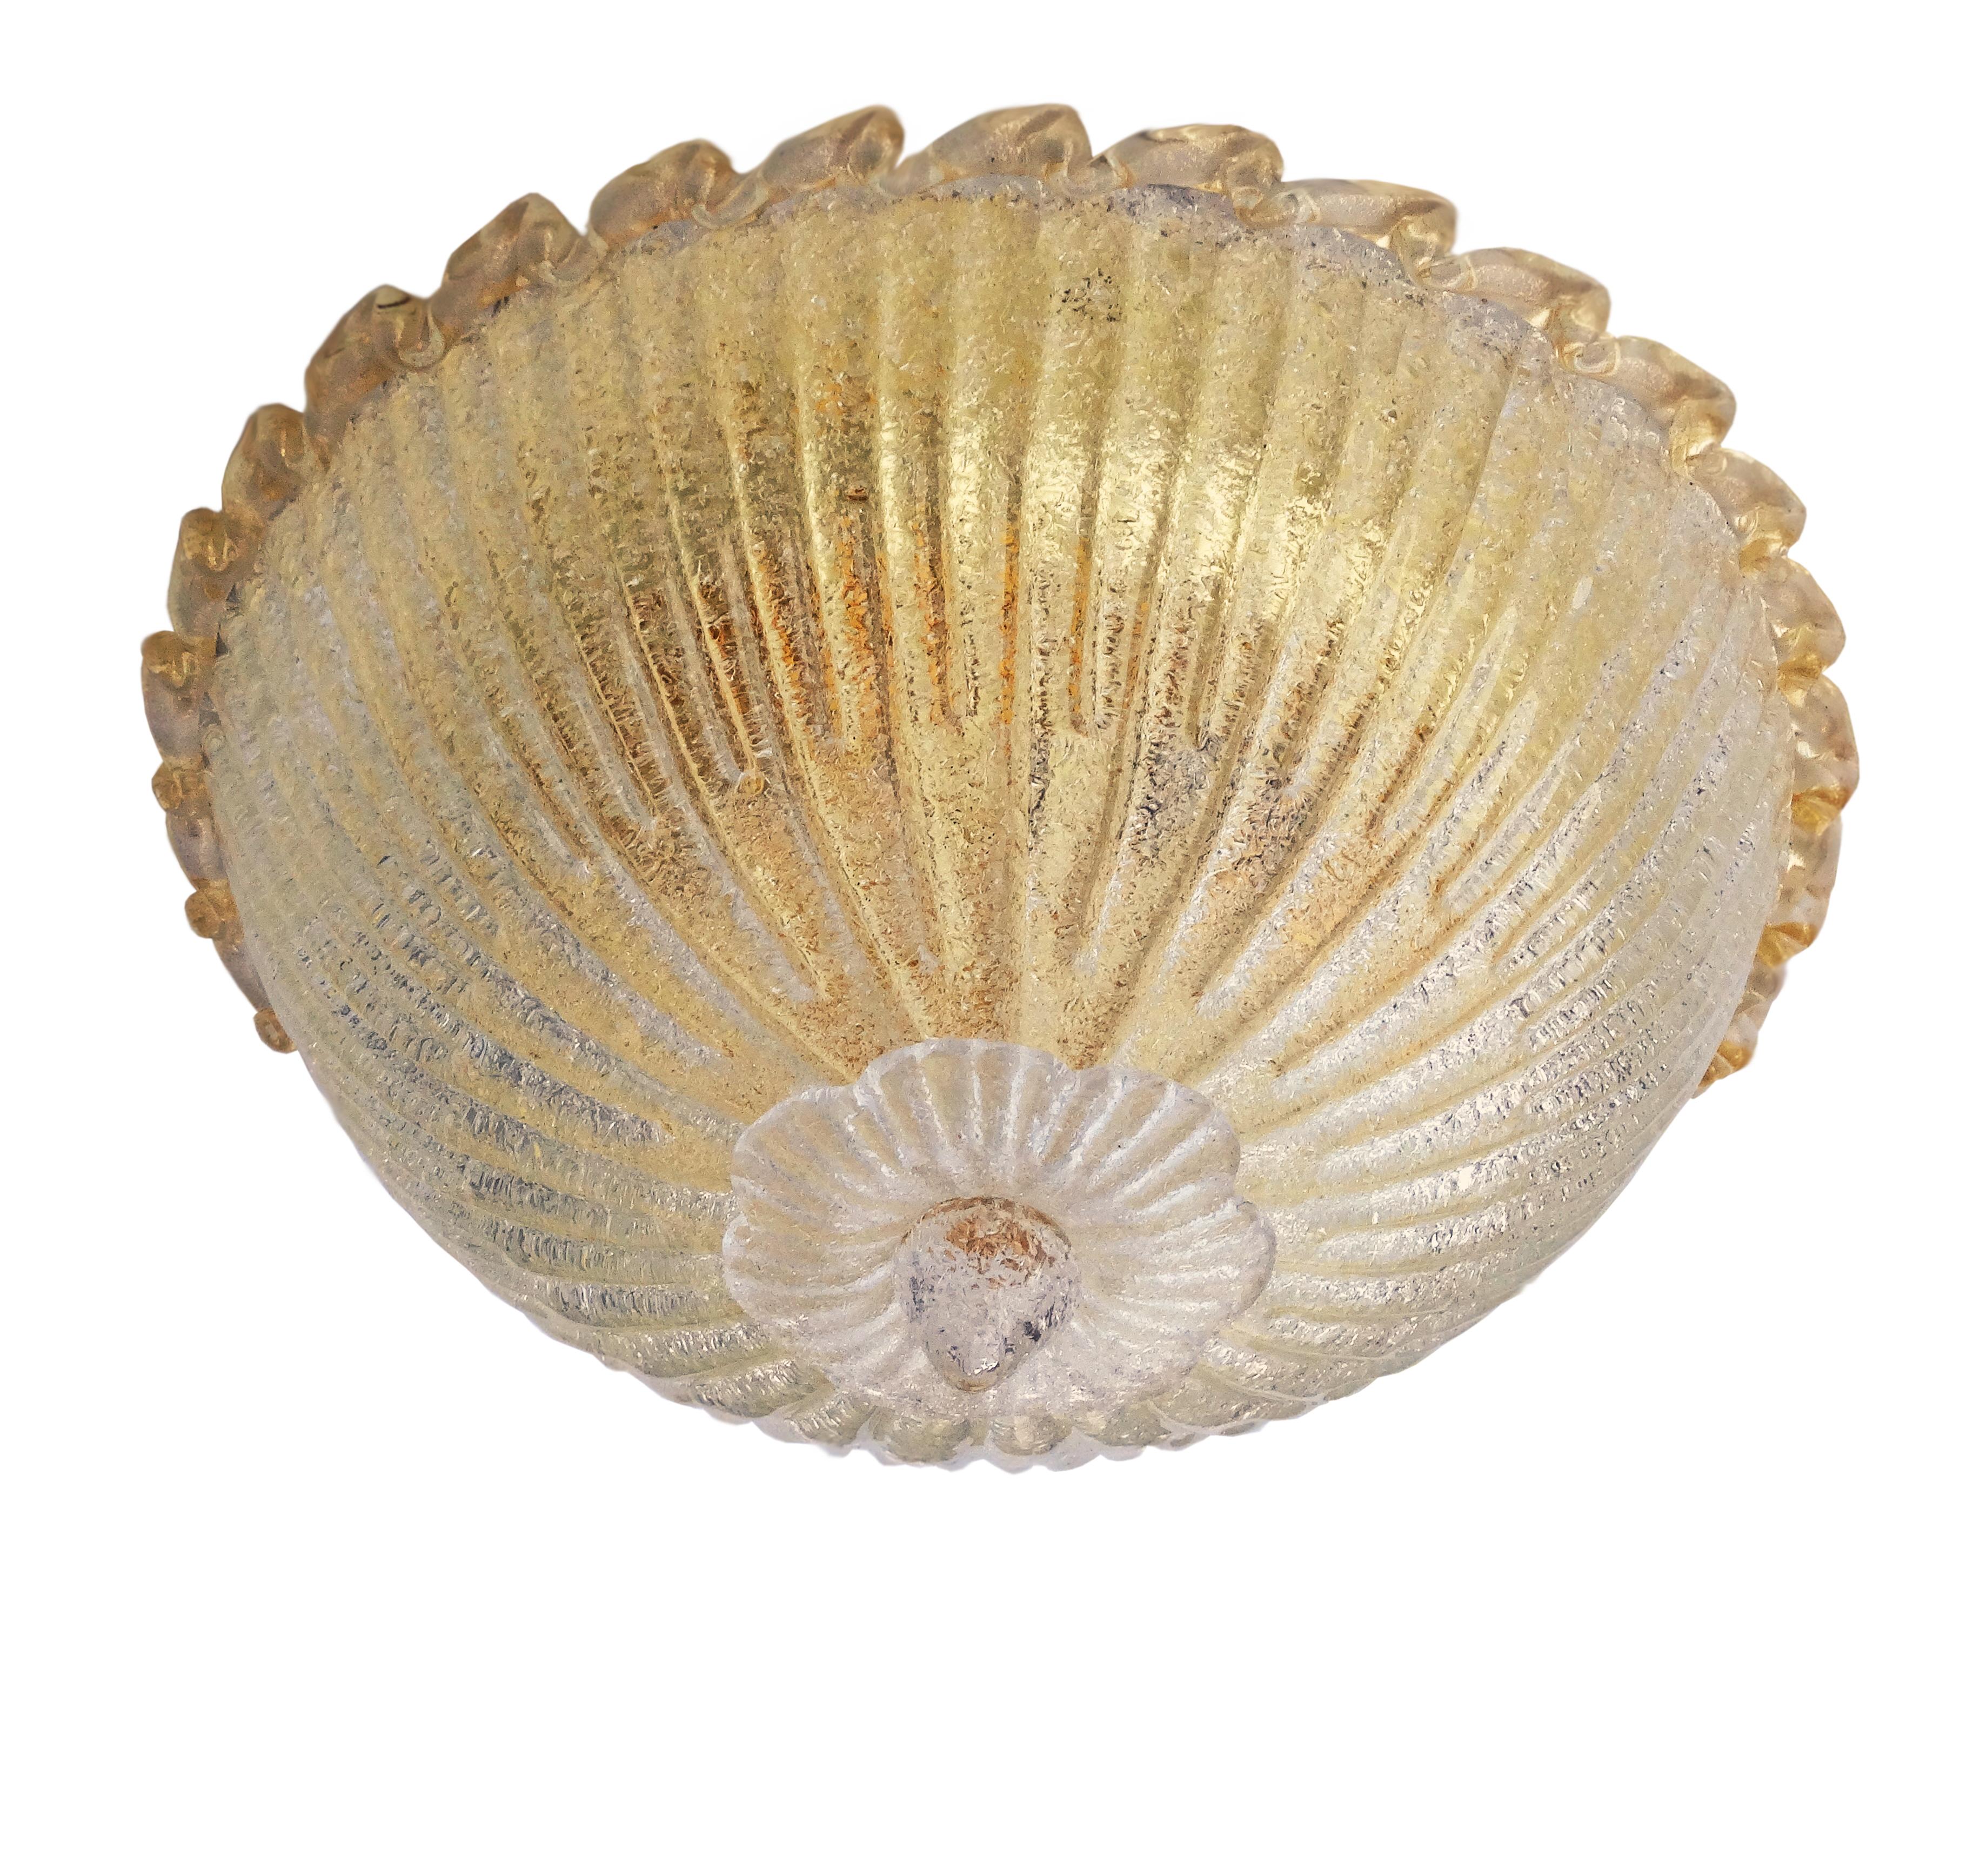 Italian flush mount with a Murano glass diffuser hand blown in Graniglia technique to produce granular textured effect with gold flecks, mounted on gold plated finish frame / Made in Italy
Measures: diameter 16 inches, height 9.5 inches
3 lights /